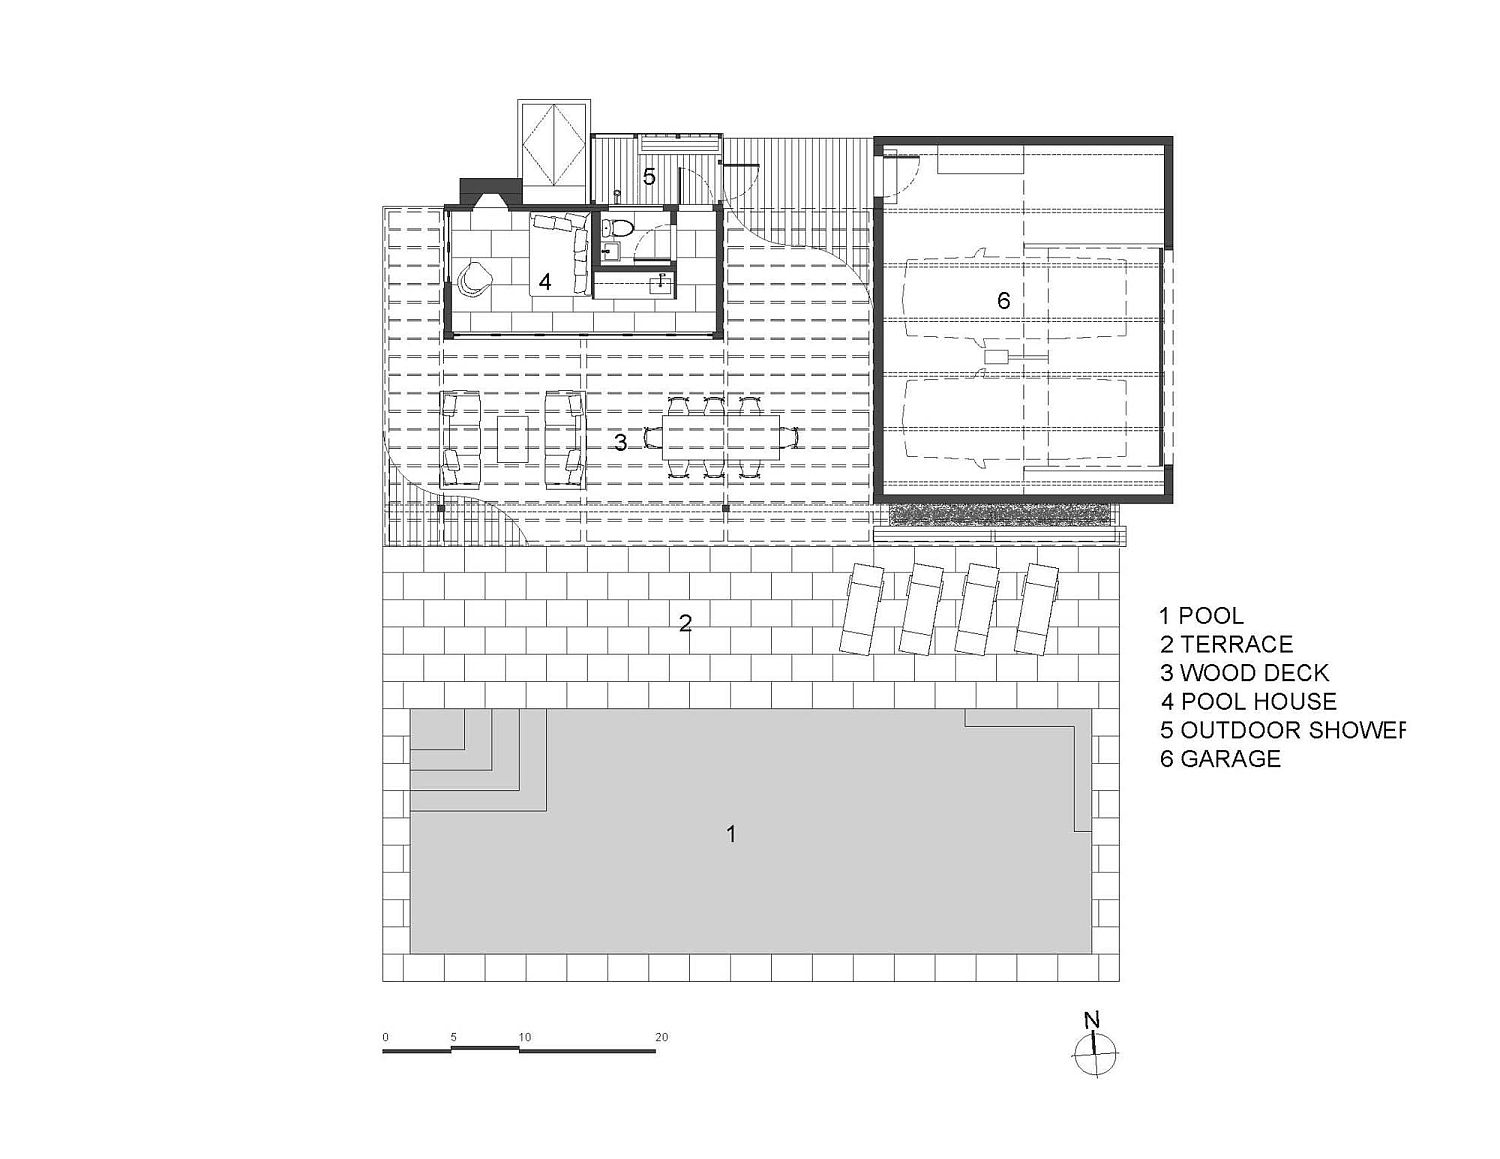 Overall-plan-and-design-of-the-pool-house